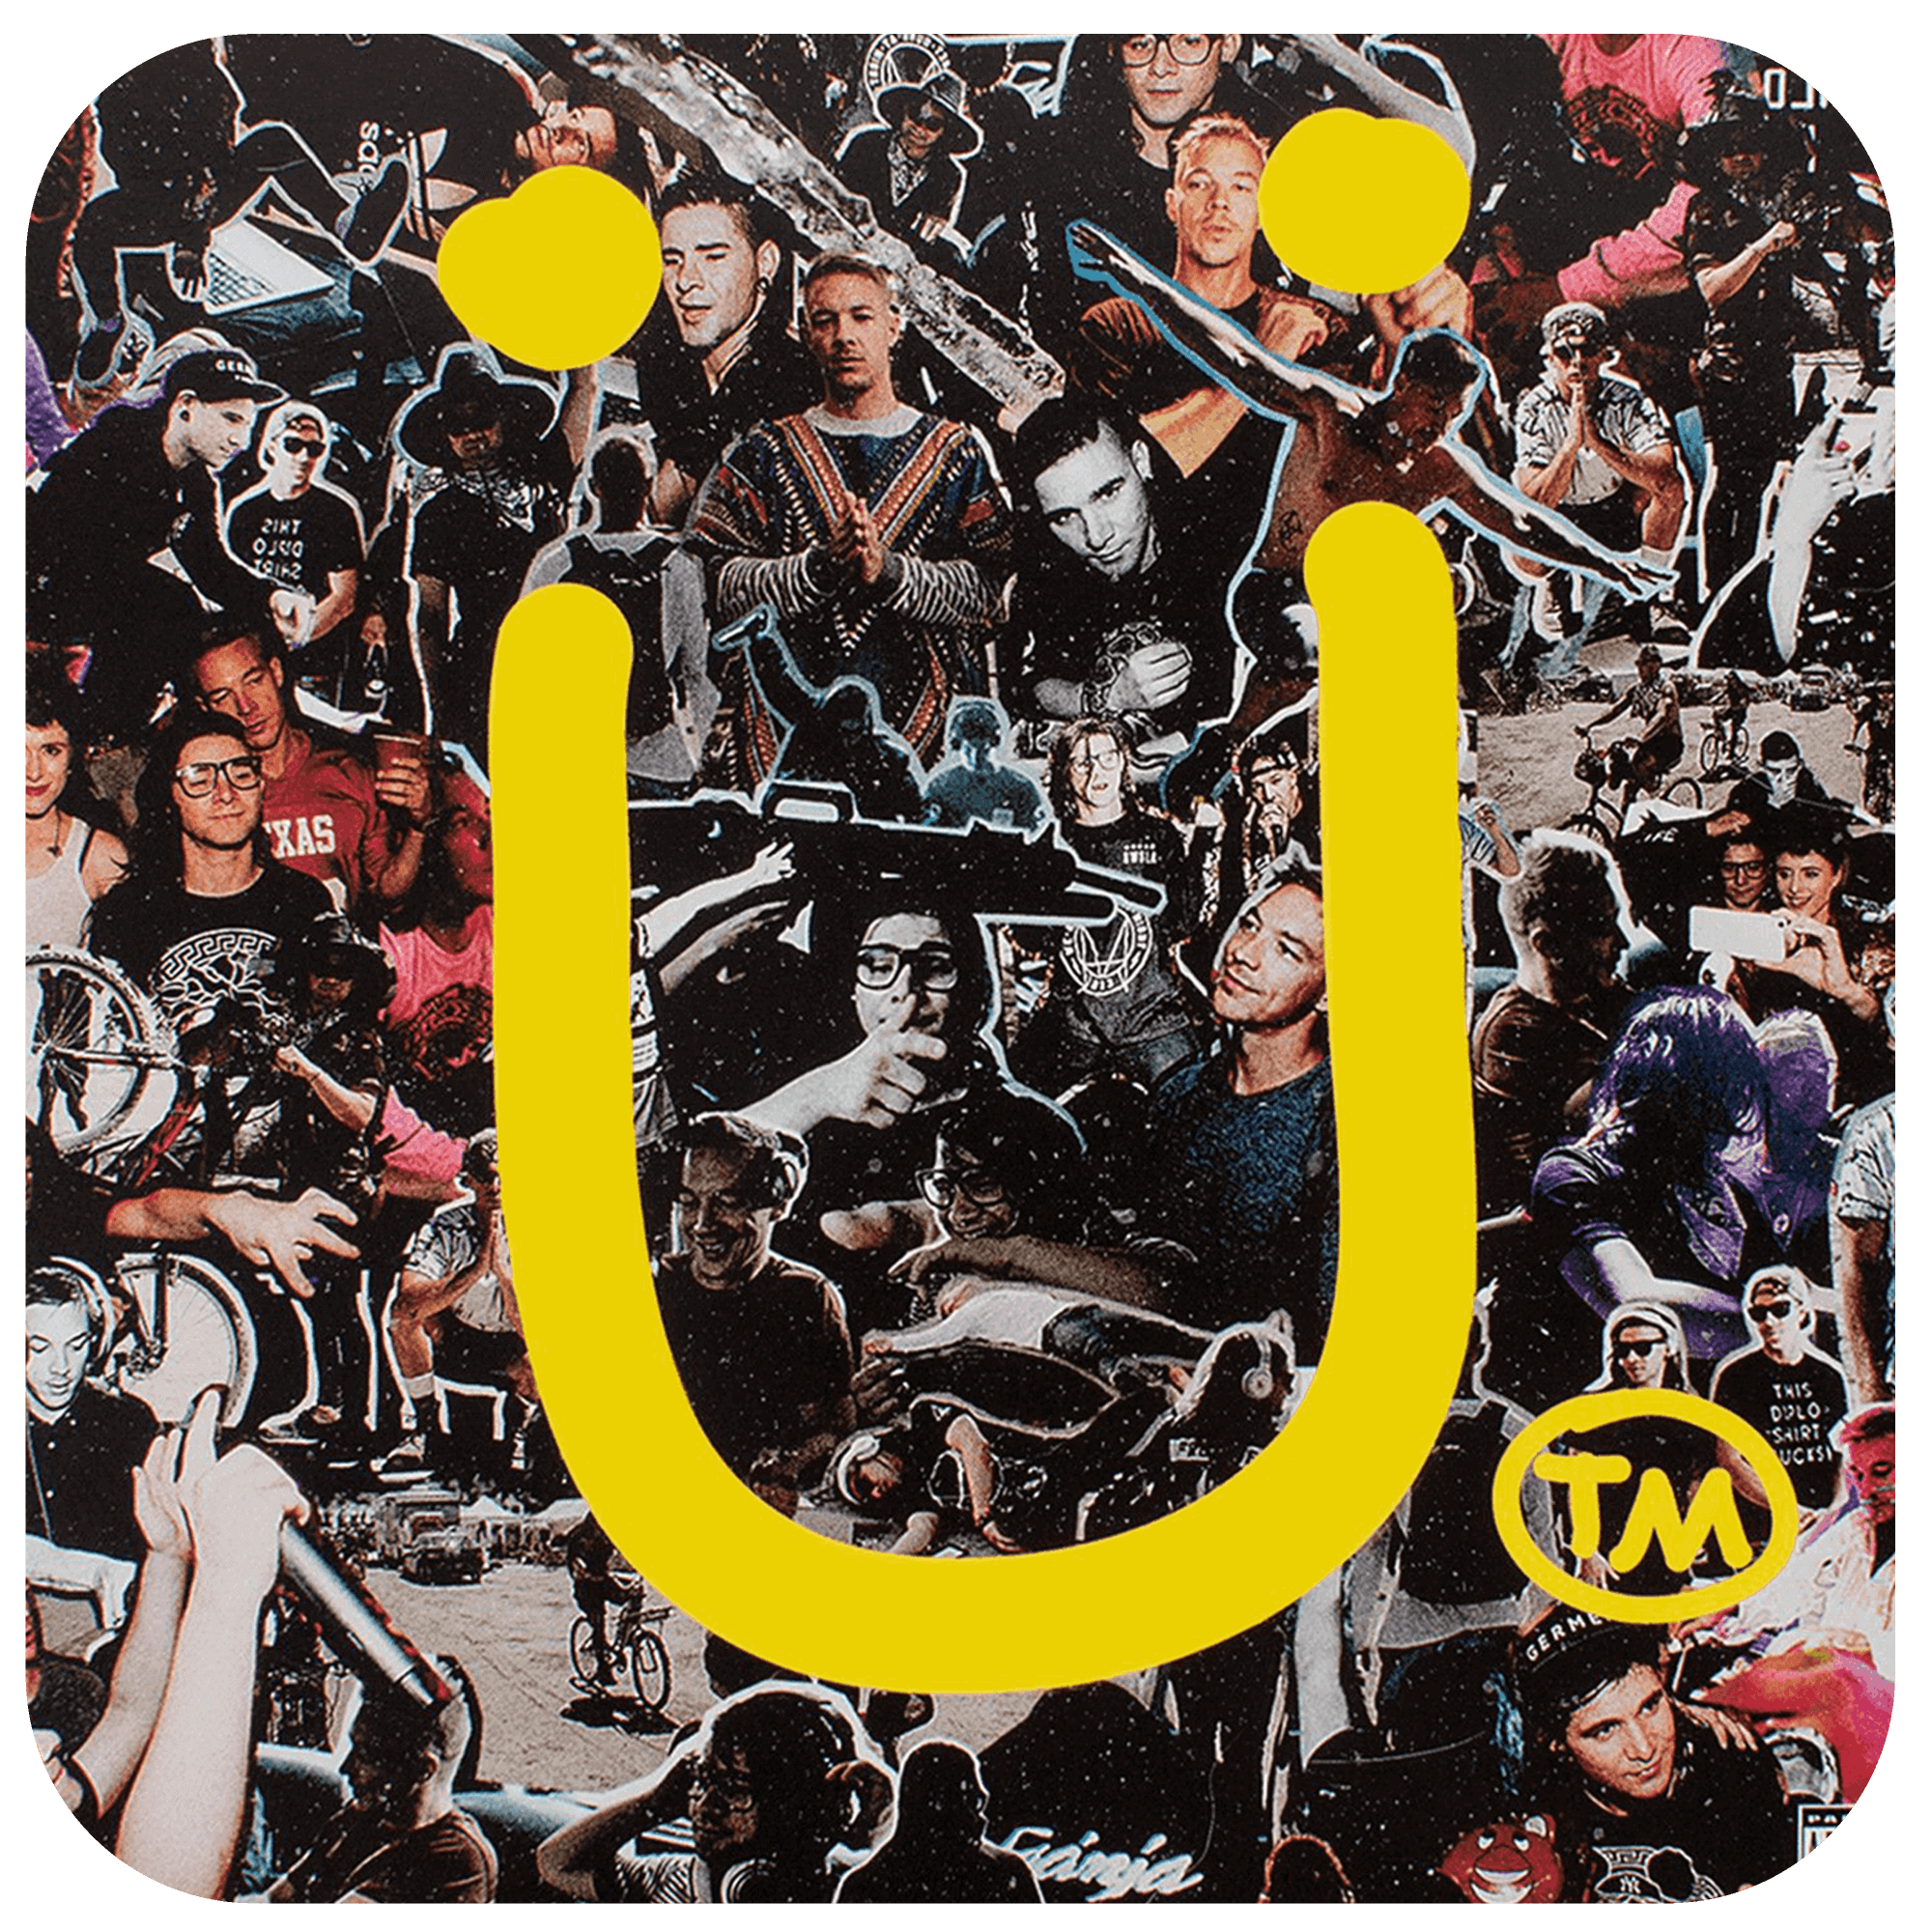 Skrillex and Diplo - Where are you now feat. Justin Bieber